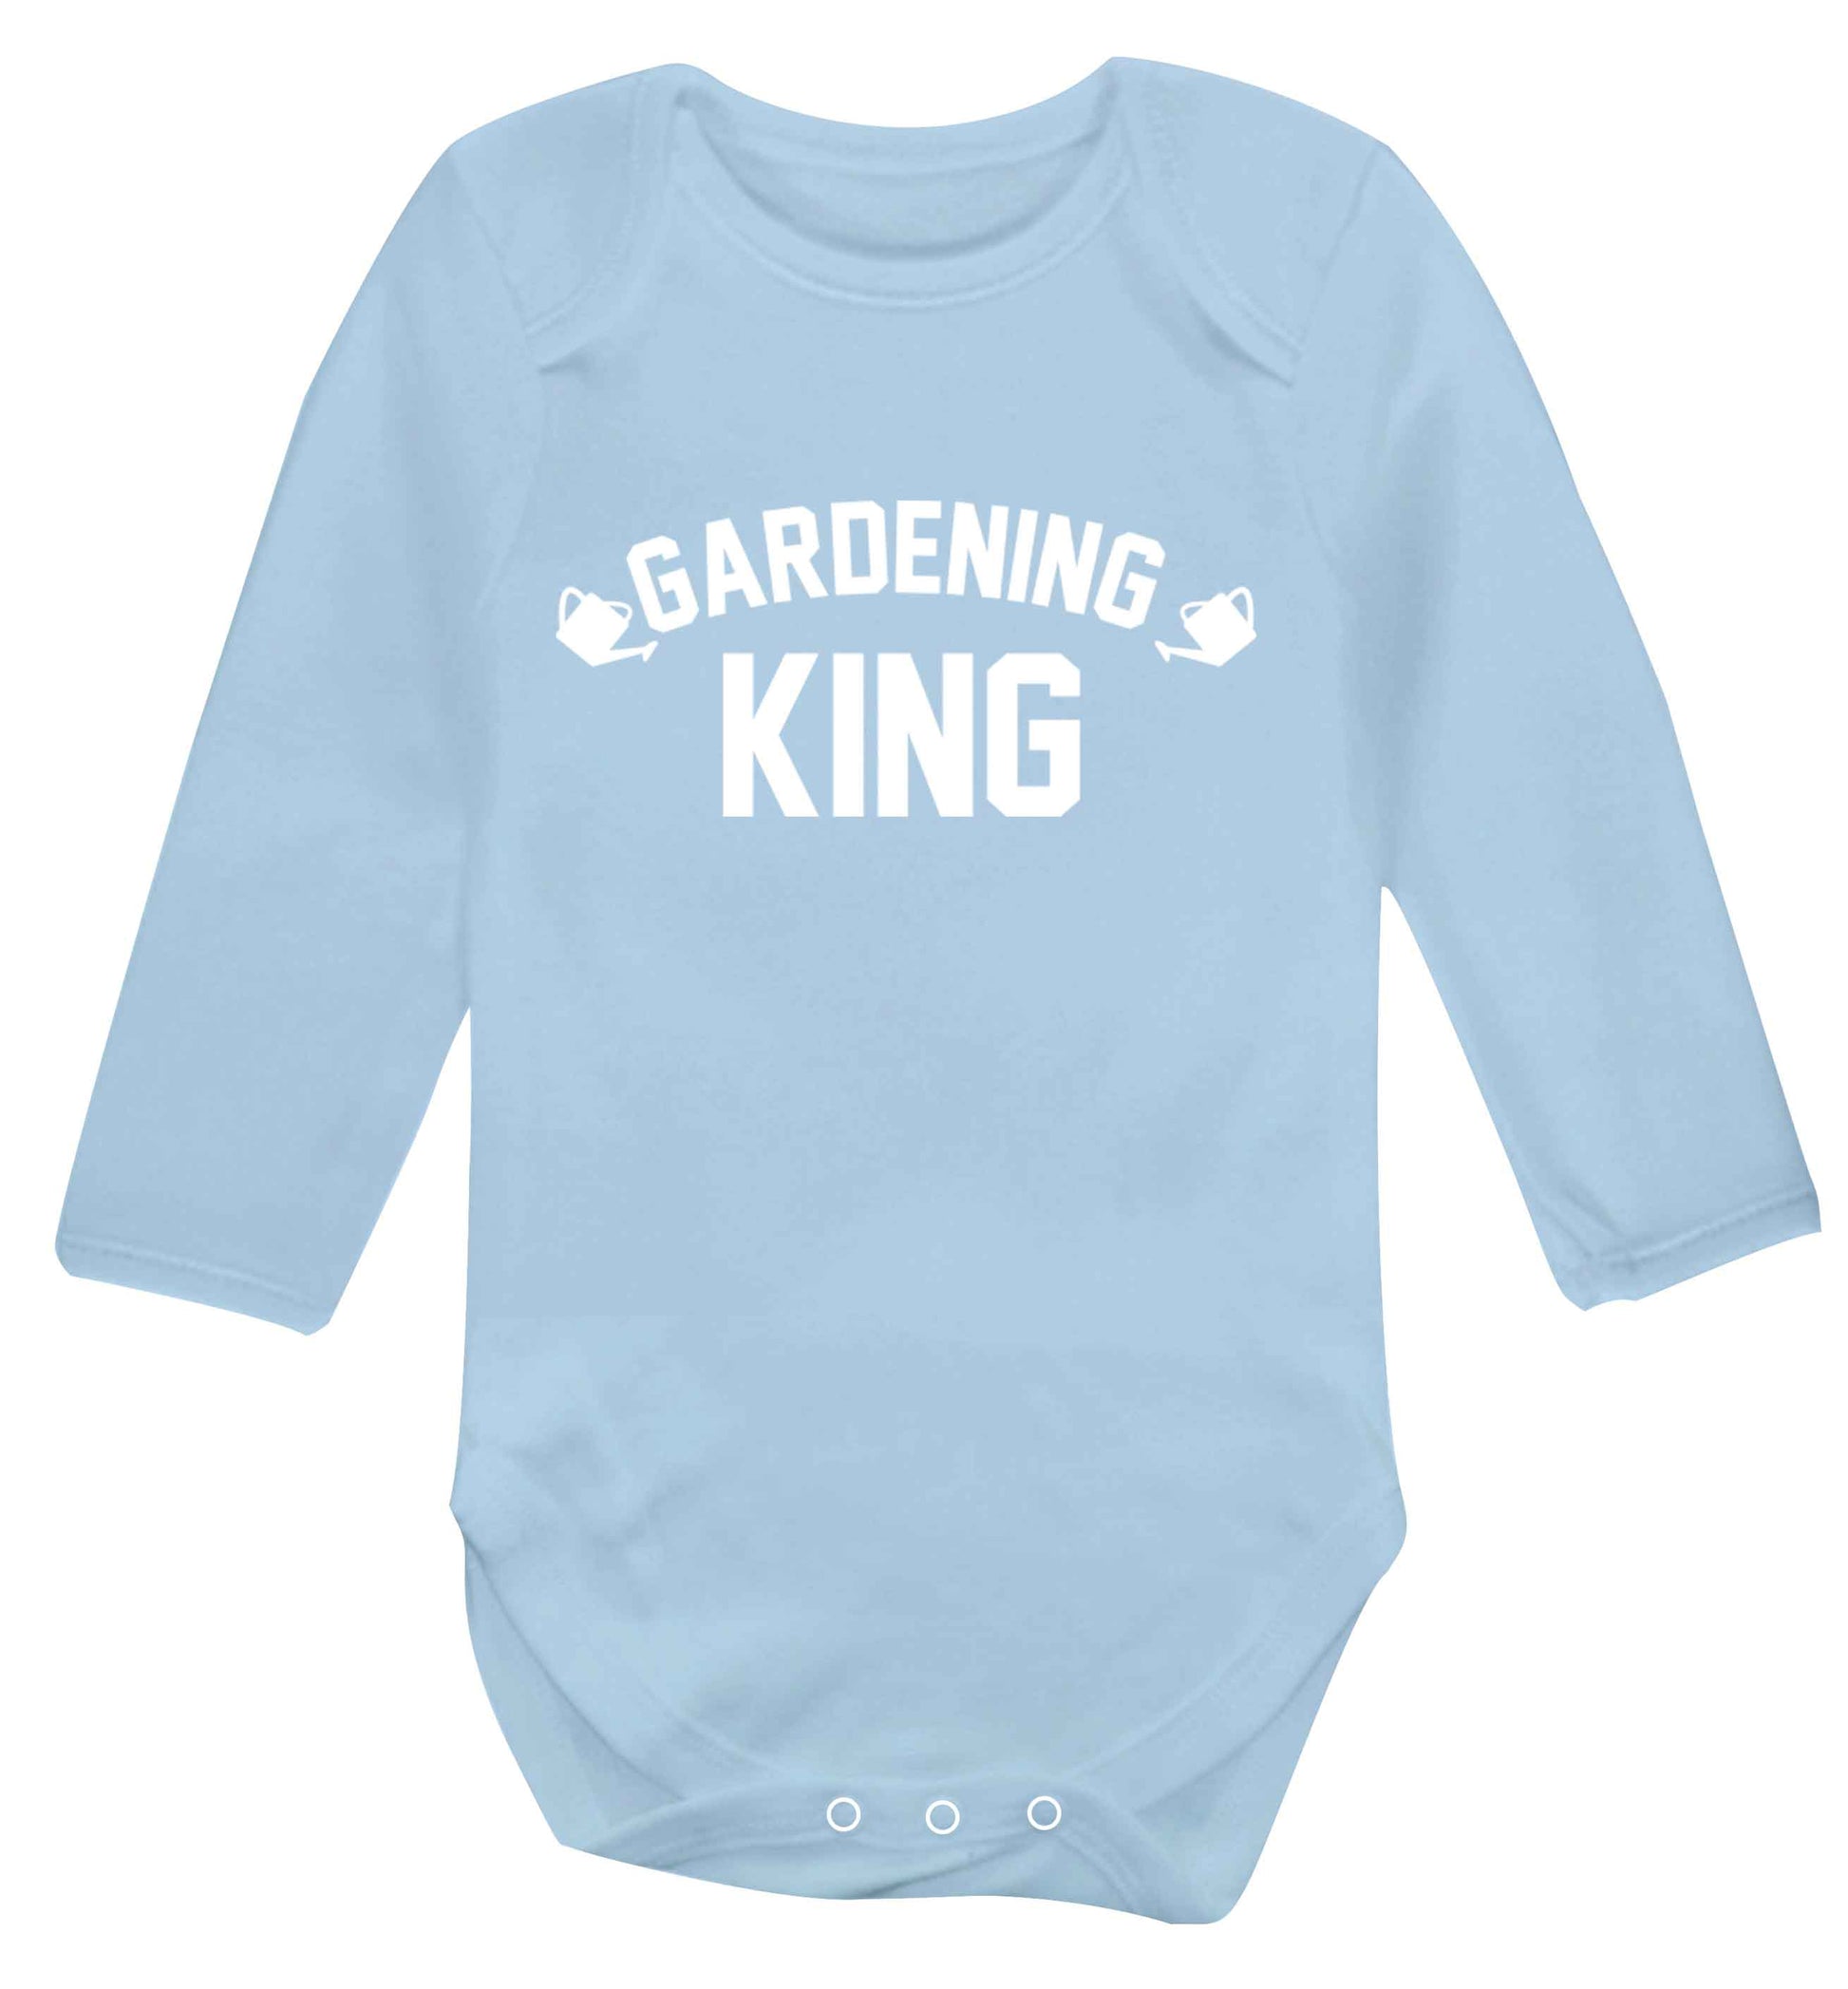 Gardening king Baby Vest long sleeved pale blue 6-12 months